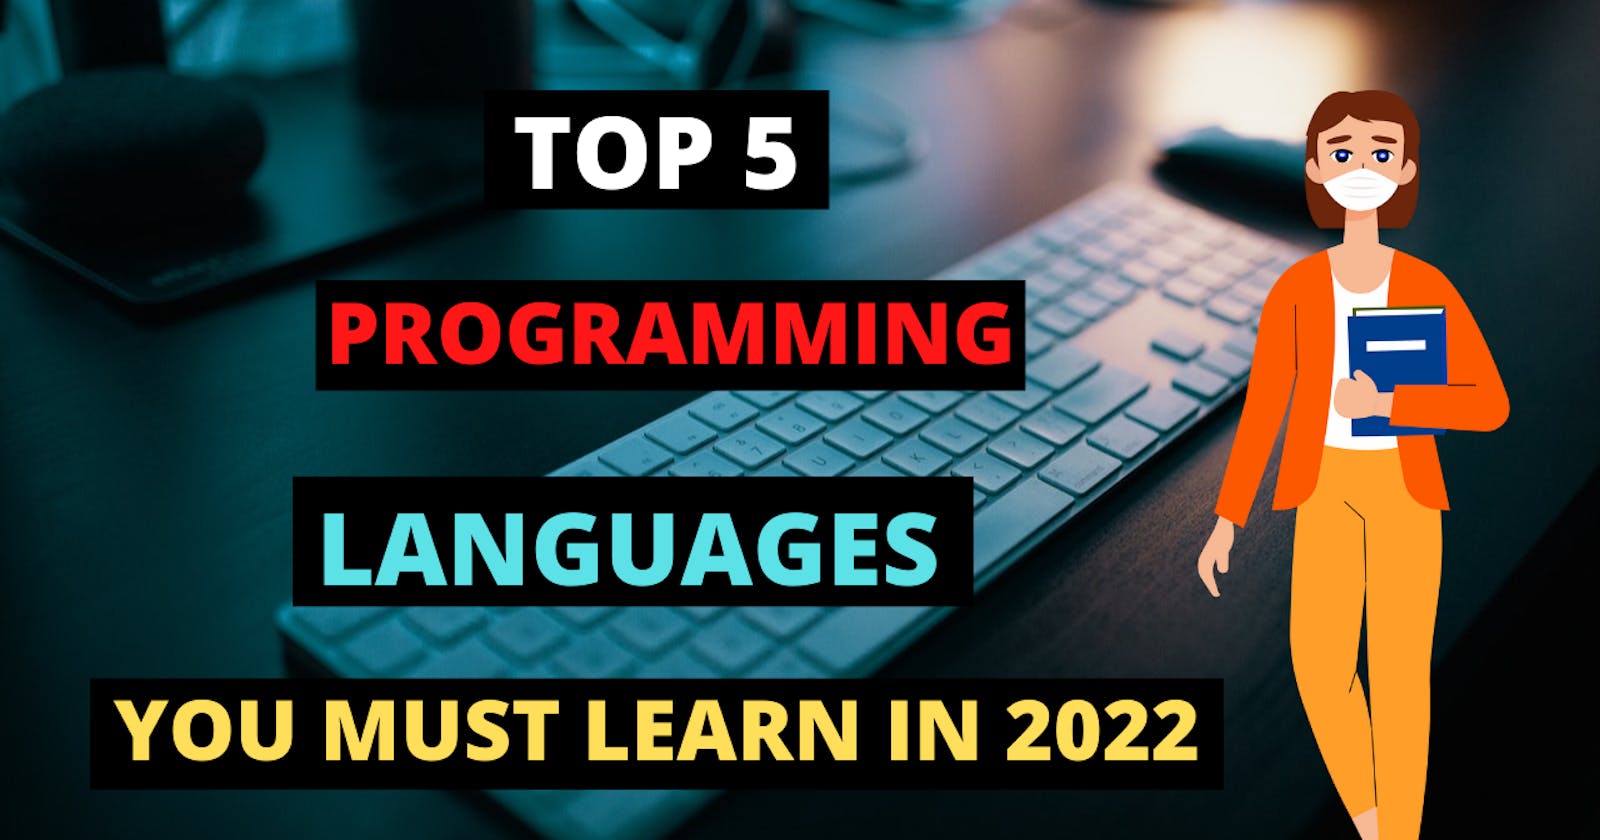 Top 5 Programming Languages in 2022 You Should Learn